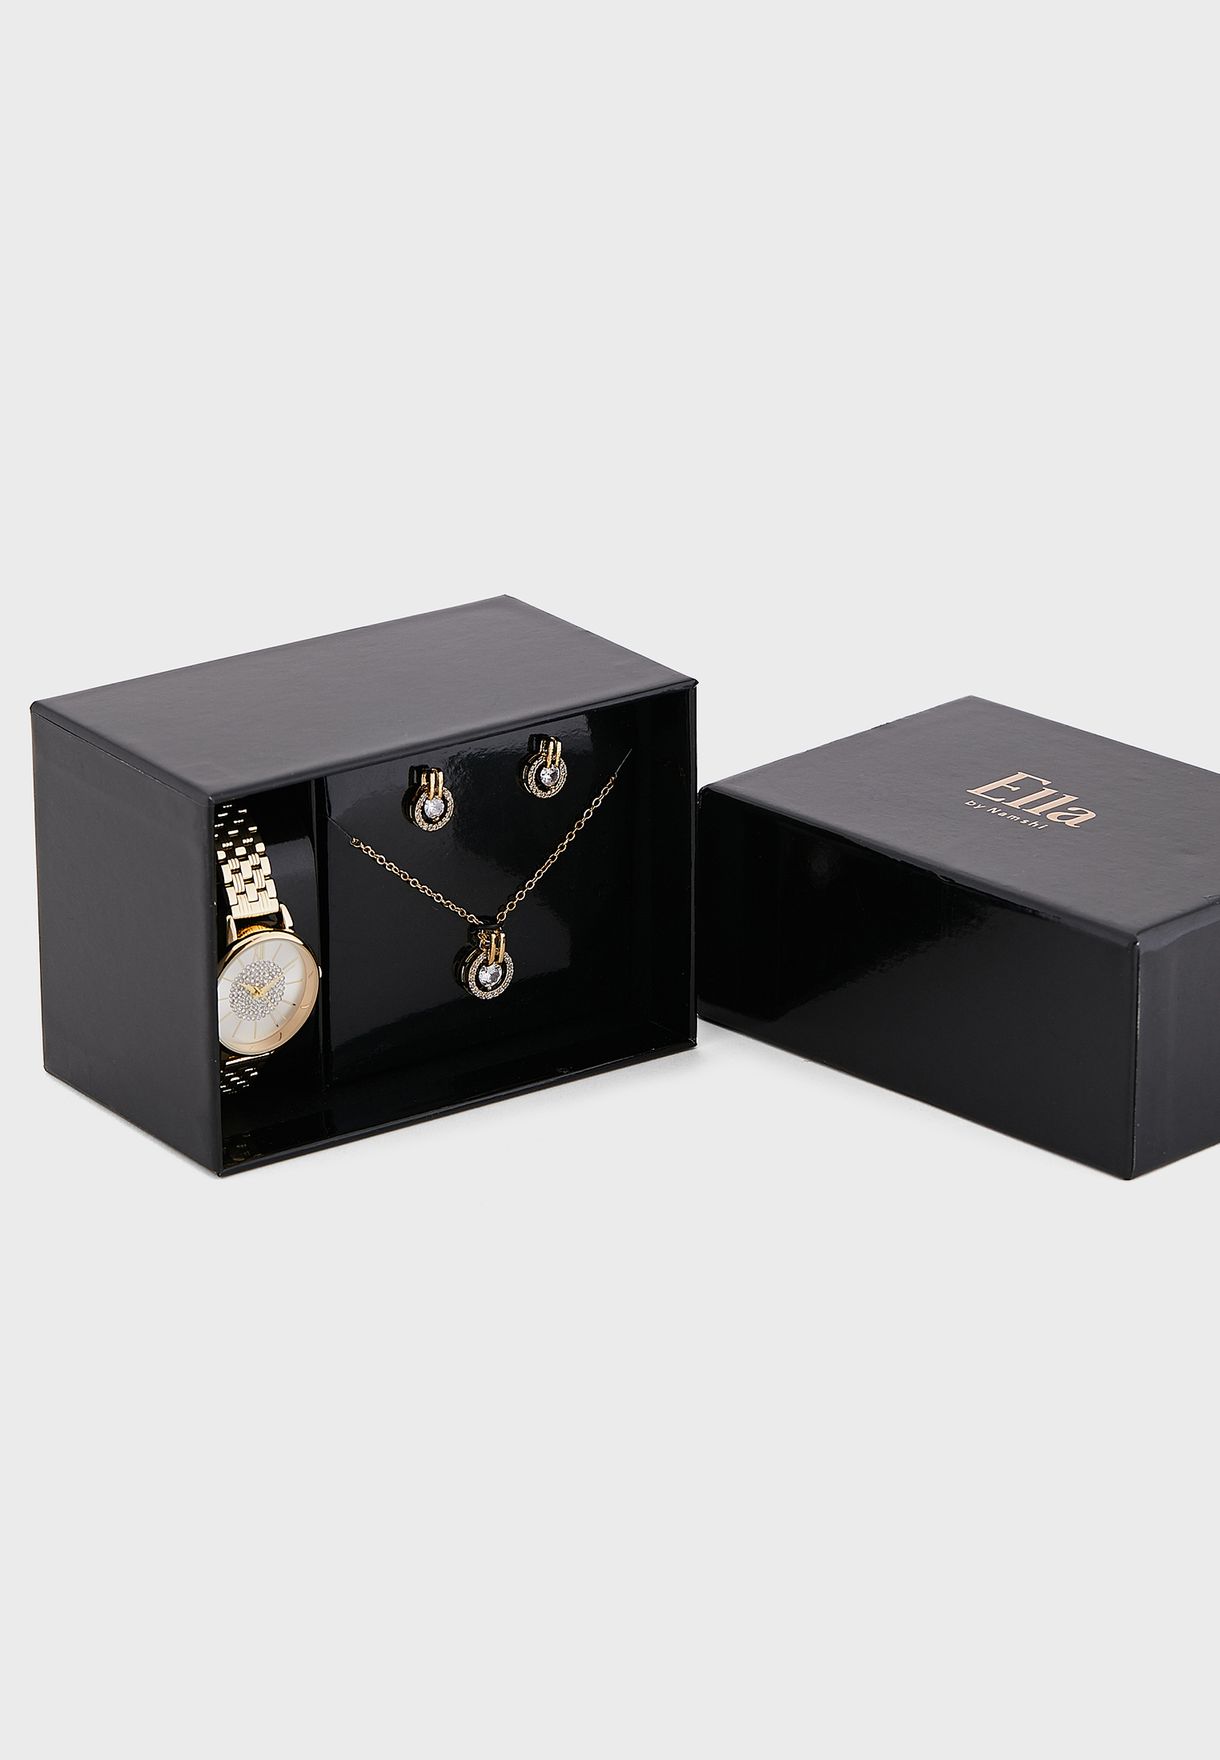 Watch, Earrings And Necklace Gift Set